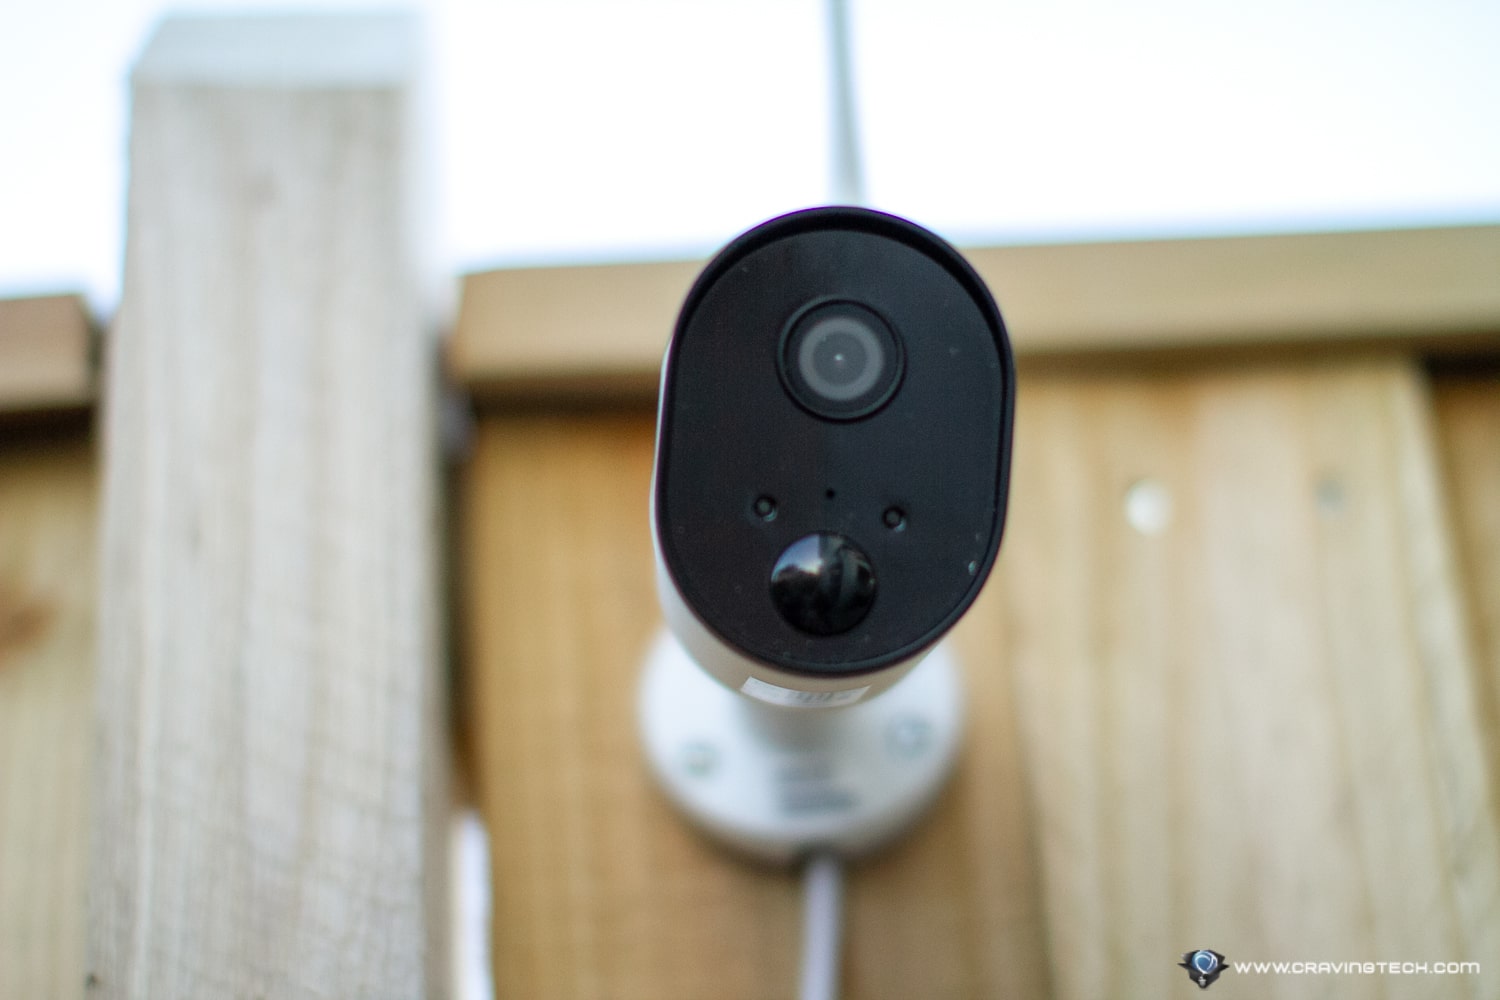 Swann 1080p HD Wi-Fi Outdoor Camera Review